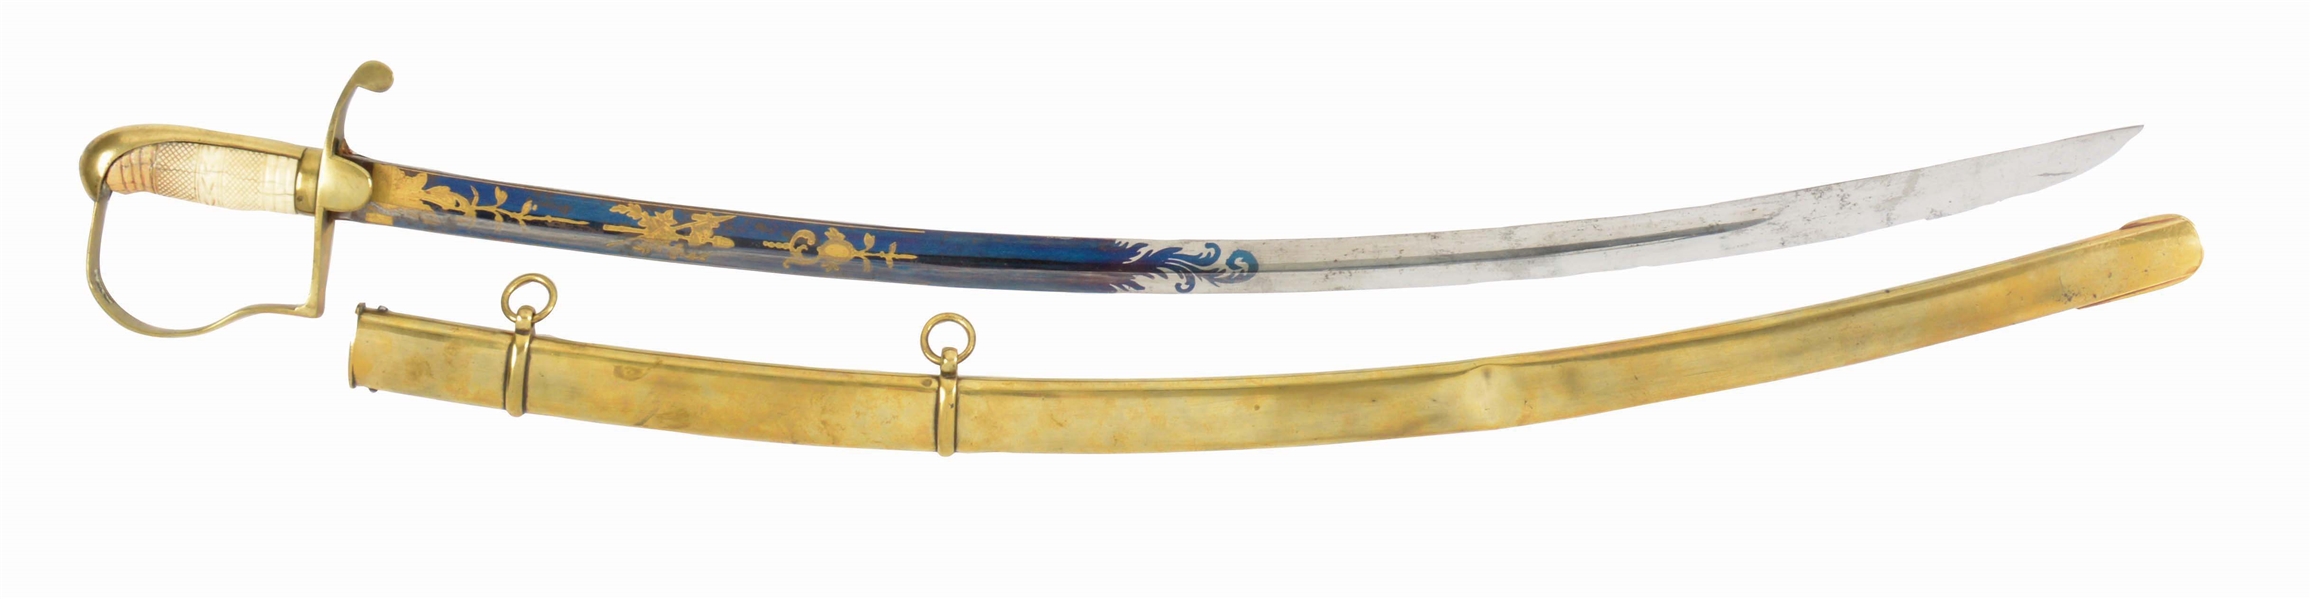 FINE MOUNTED ARTILLERY OFFICERS SABER WITH SCABBARD.